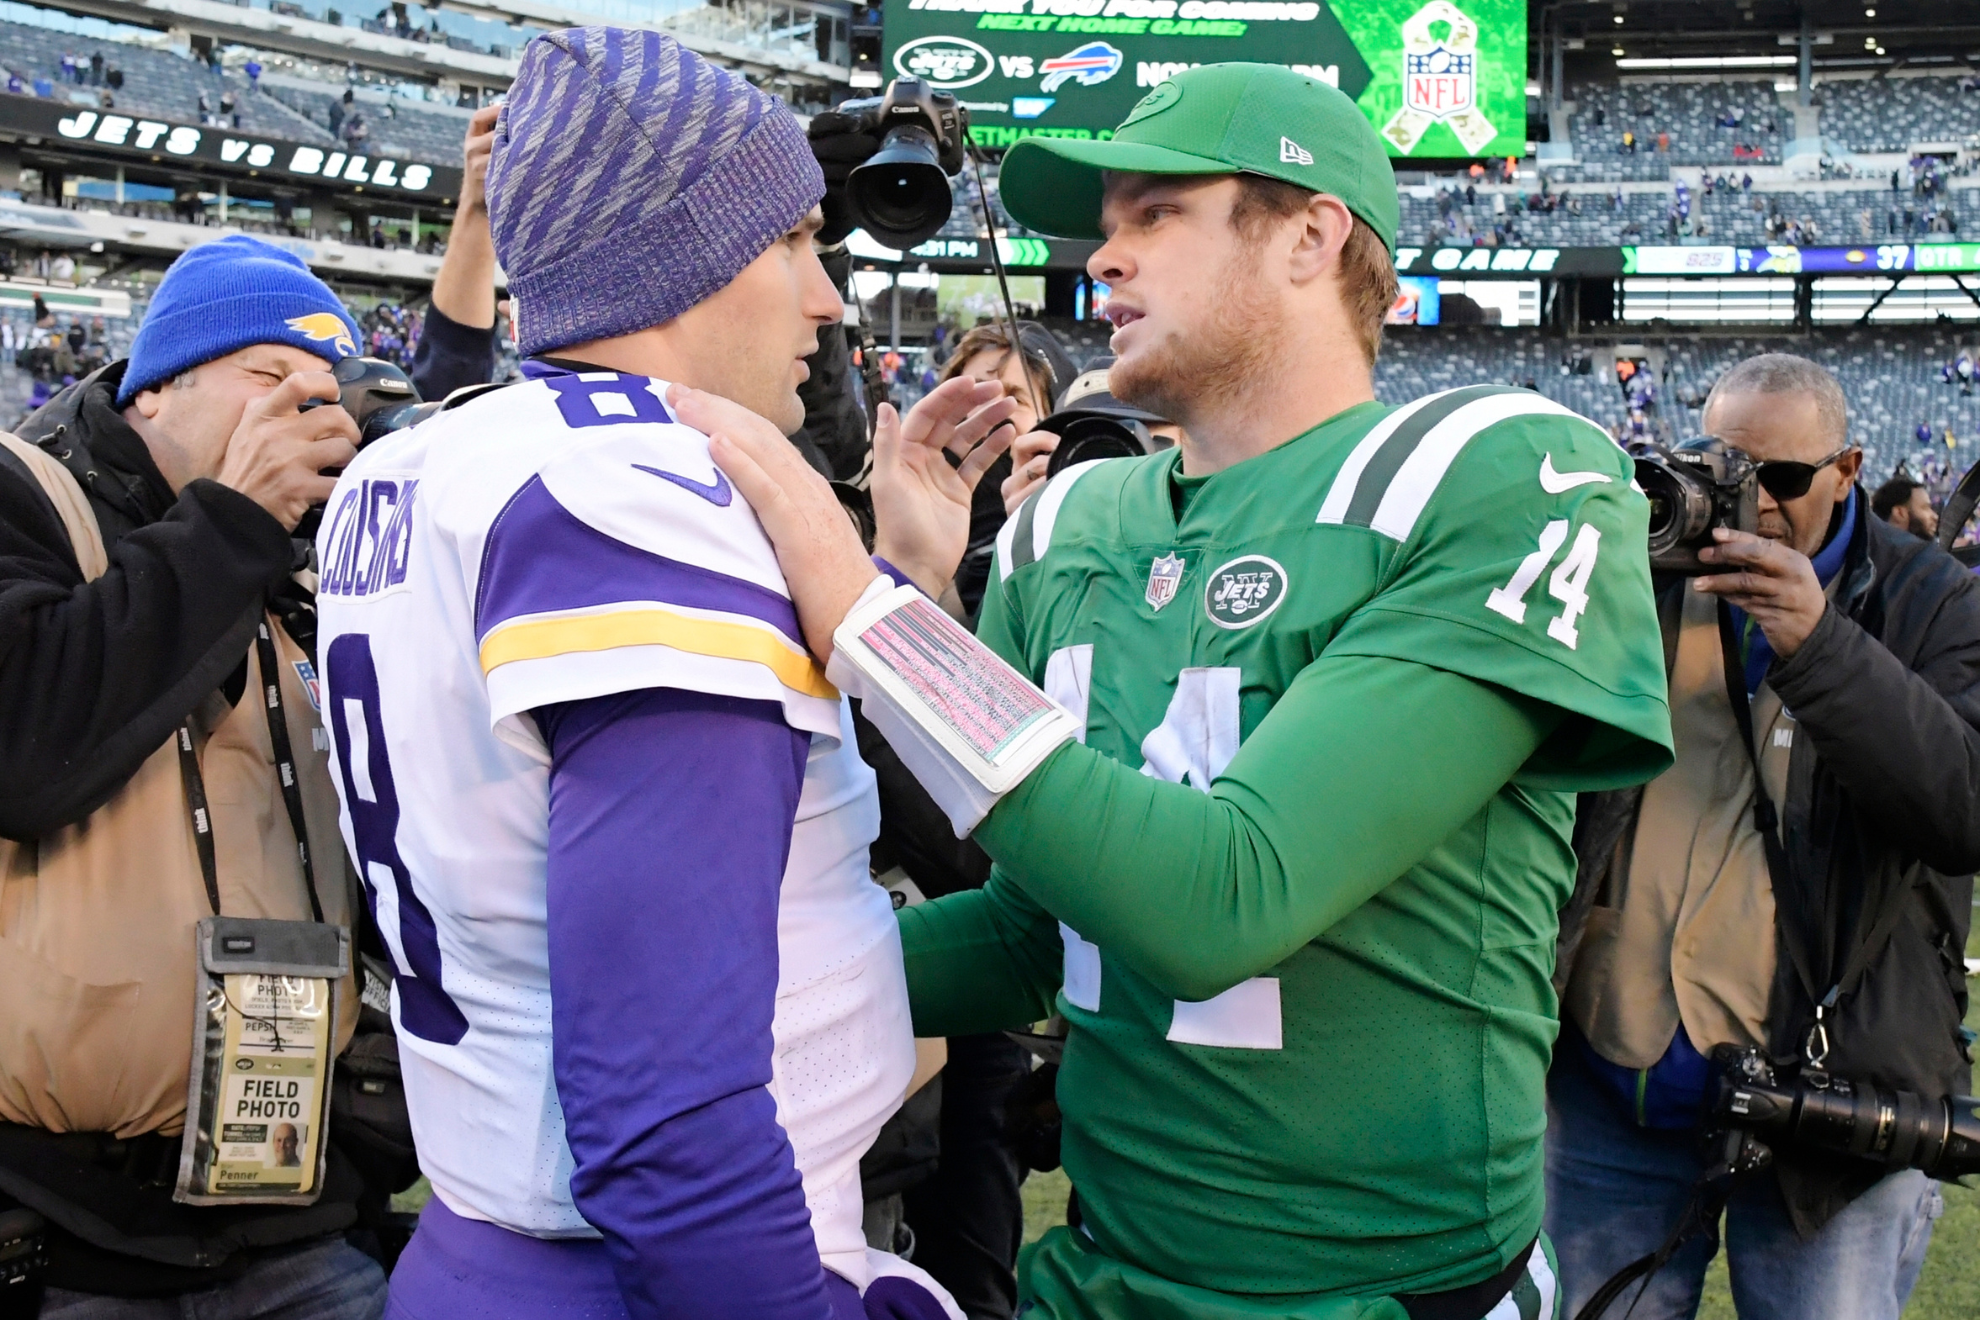 Could we see Sam Darnold takes Kirk Cousins spot?